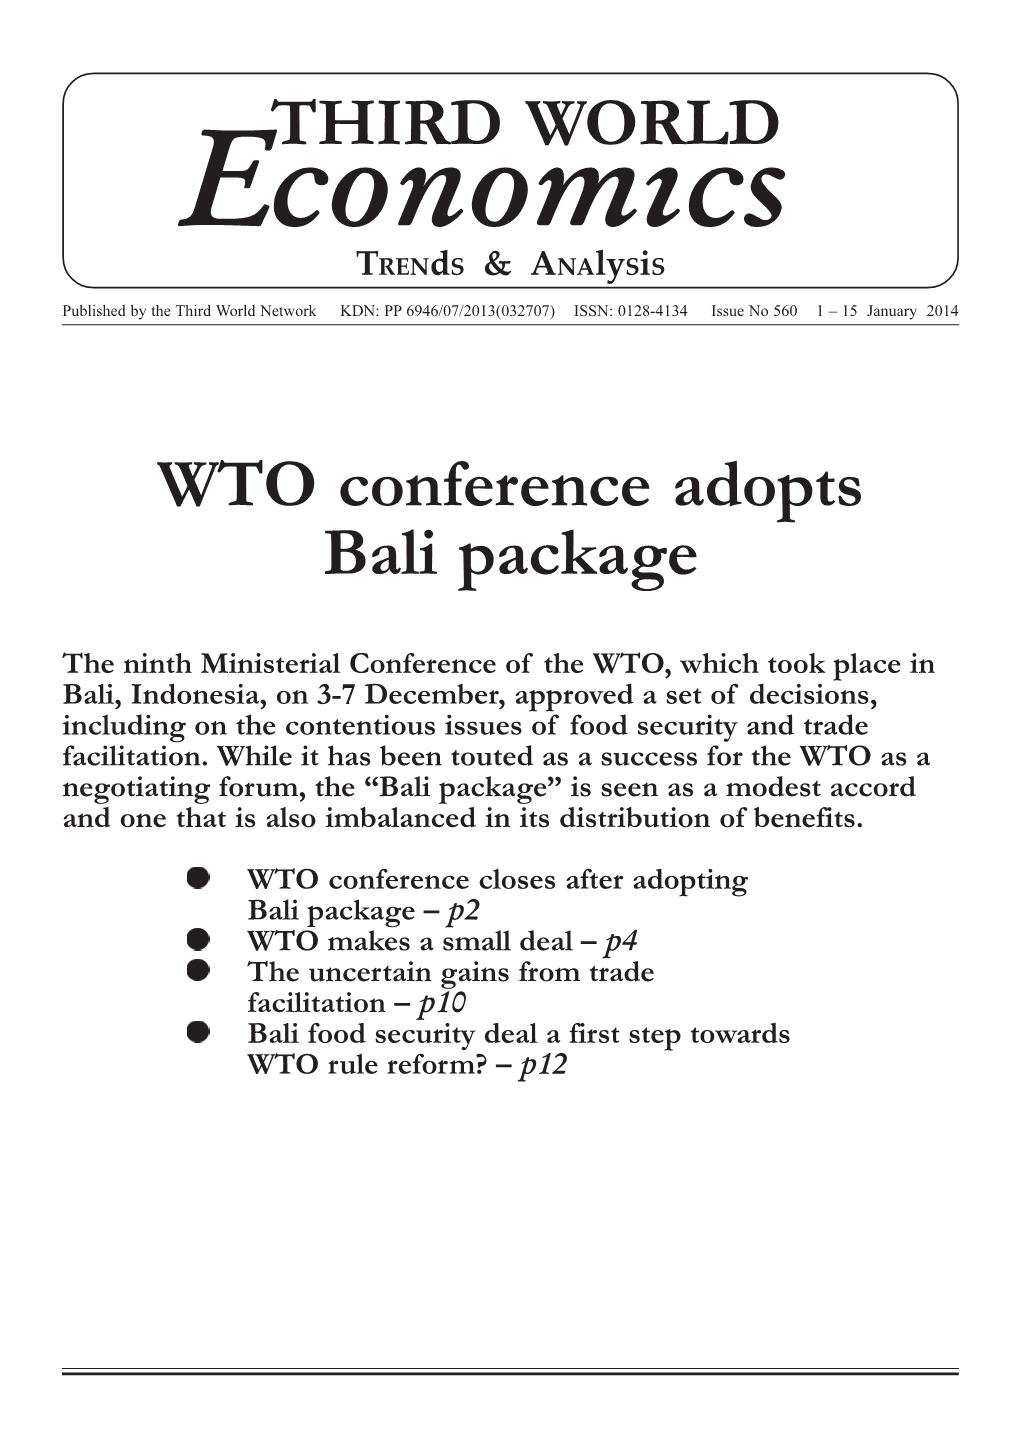 THIRD WORLD WTO Conference Adopts Bali Package